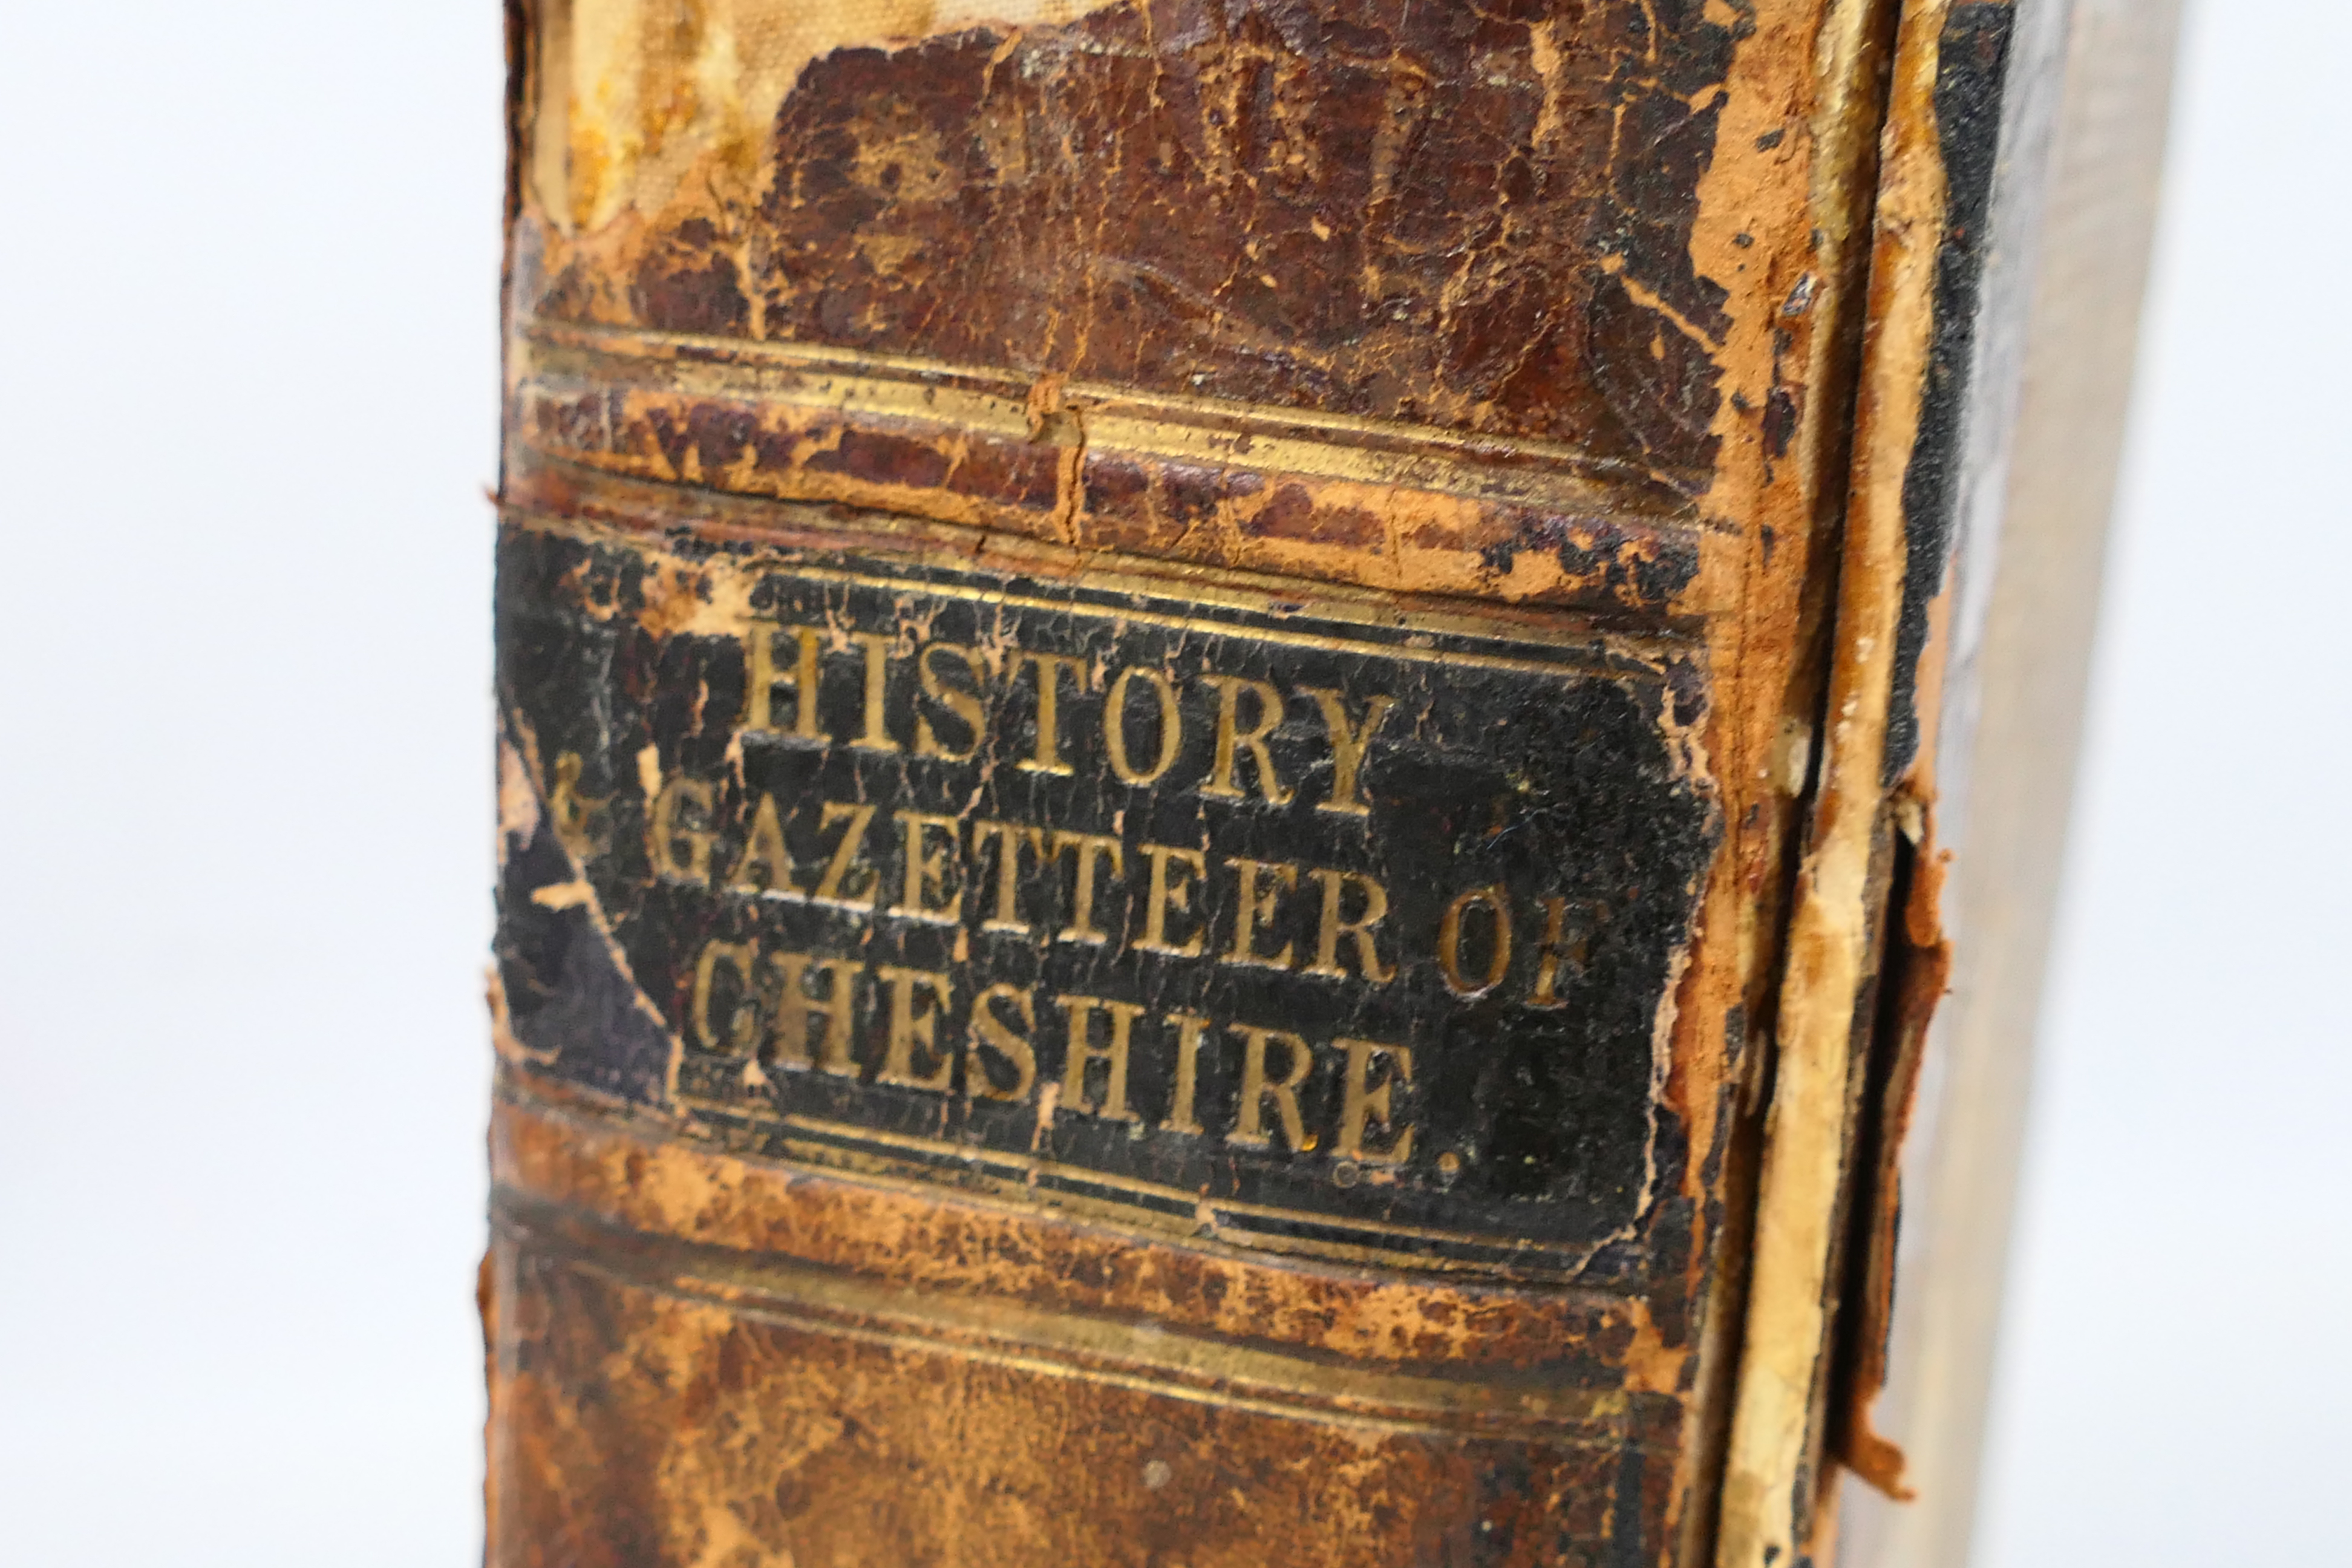 White, Francis - History & Gazetteer Of Cheshire, no map. - Image 2 of 7